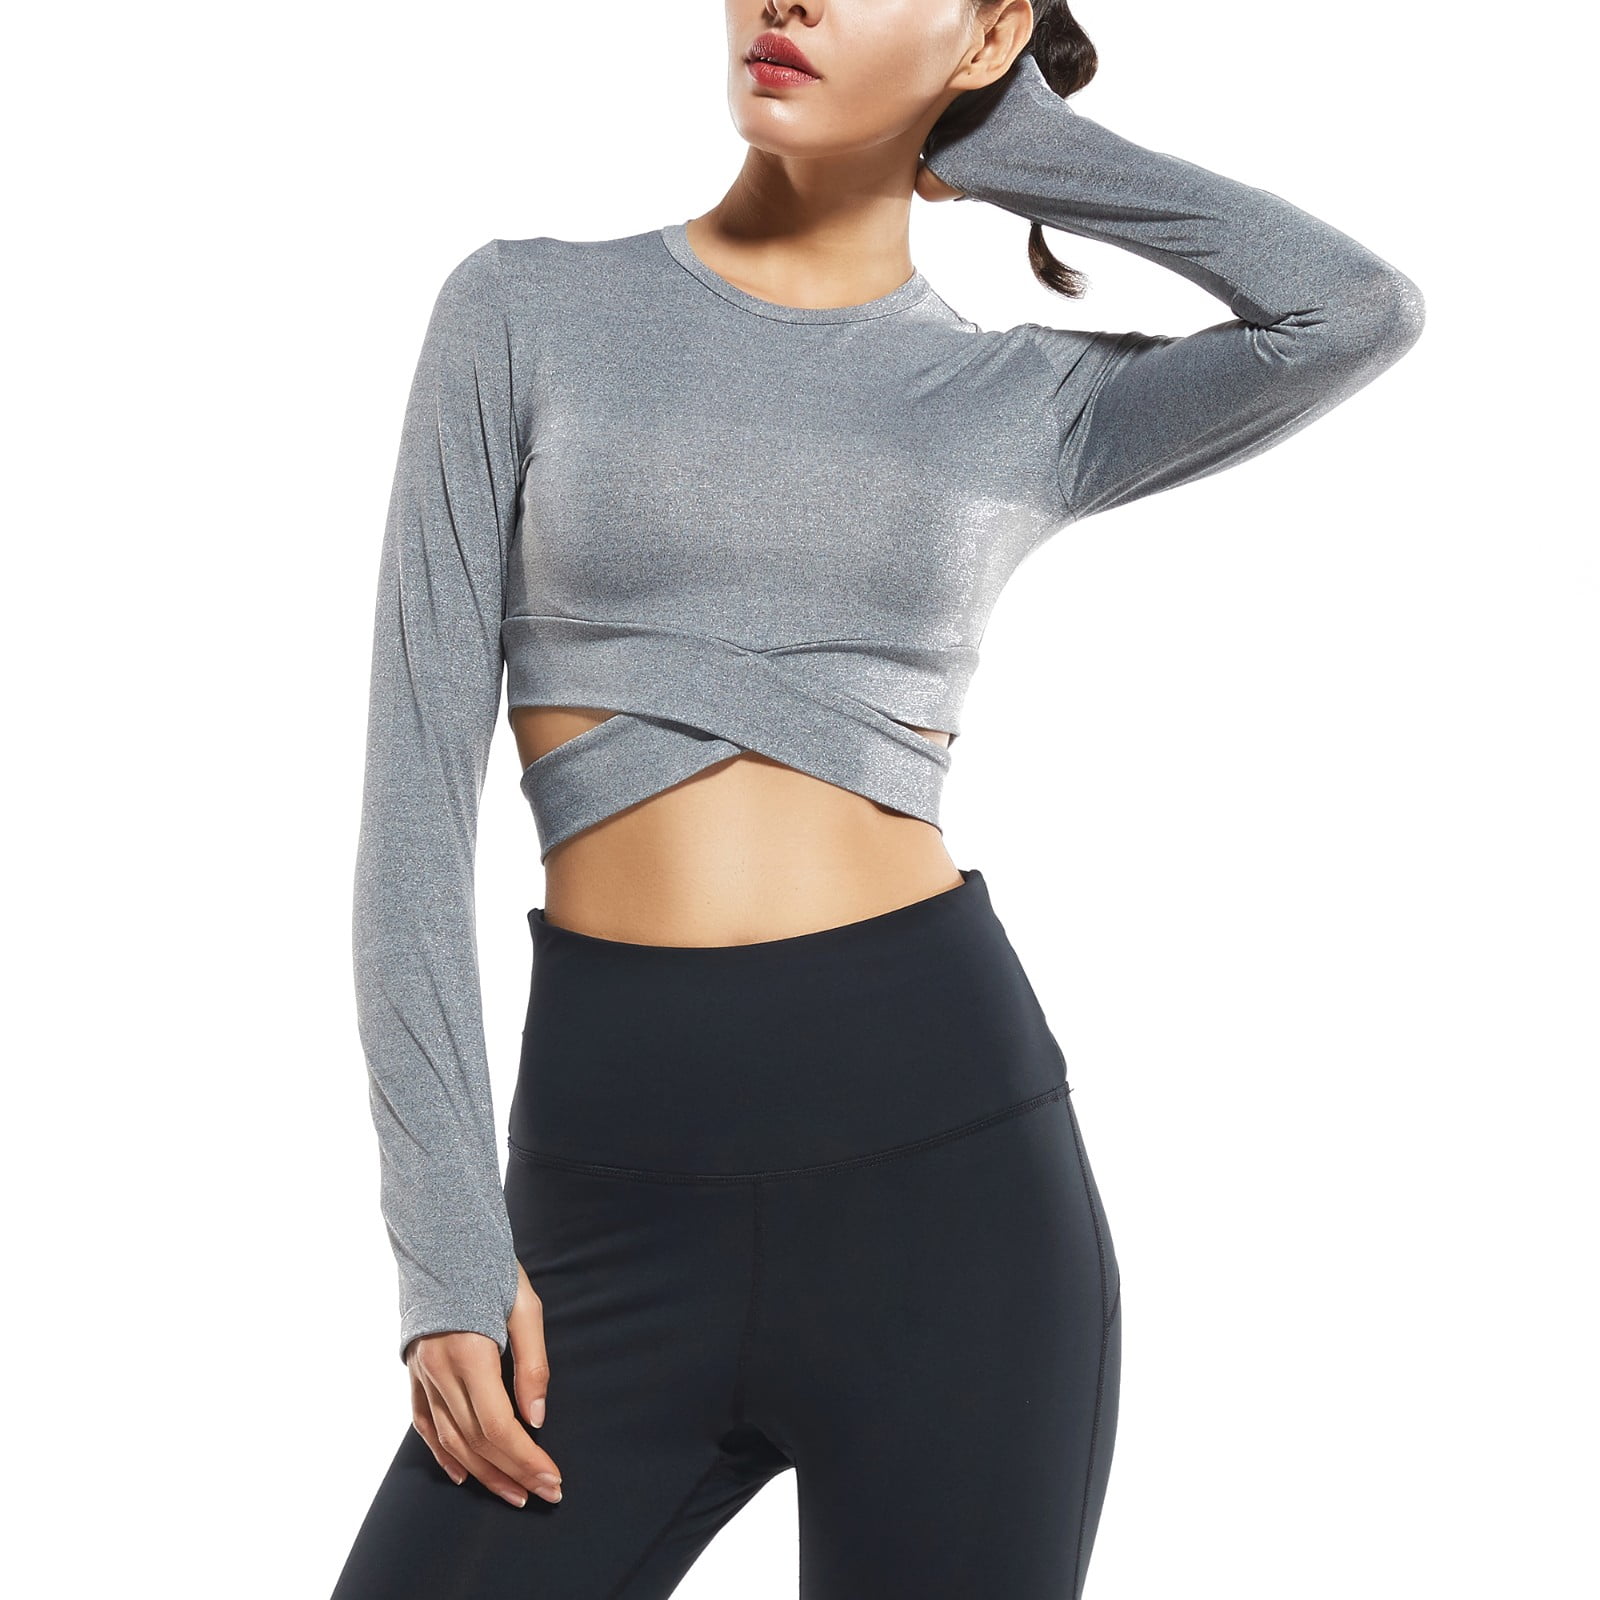 Removable Crop Top Padded Compression Long Sleeve Fitness Athletic Yoga Sports Shirt Workout Yoga Tops for Women